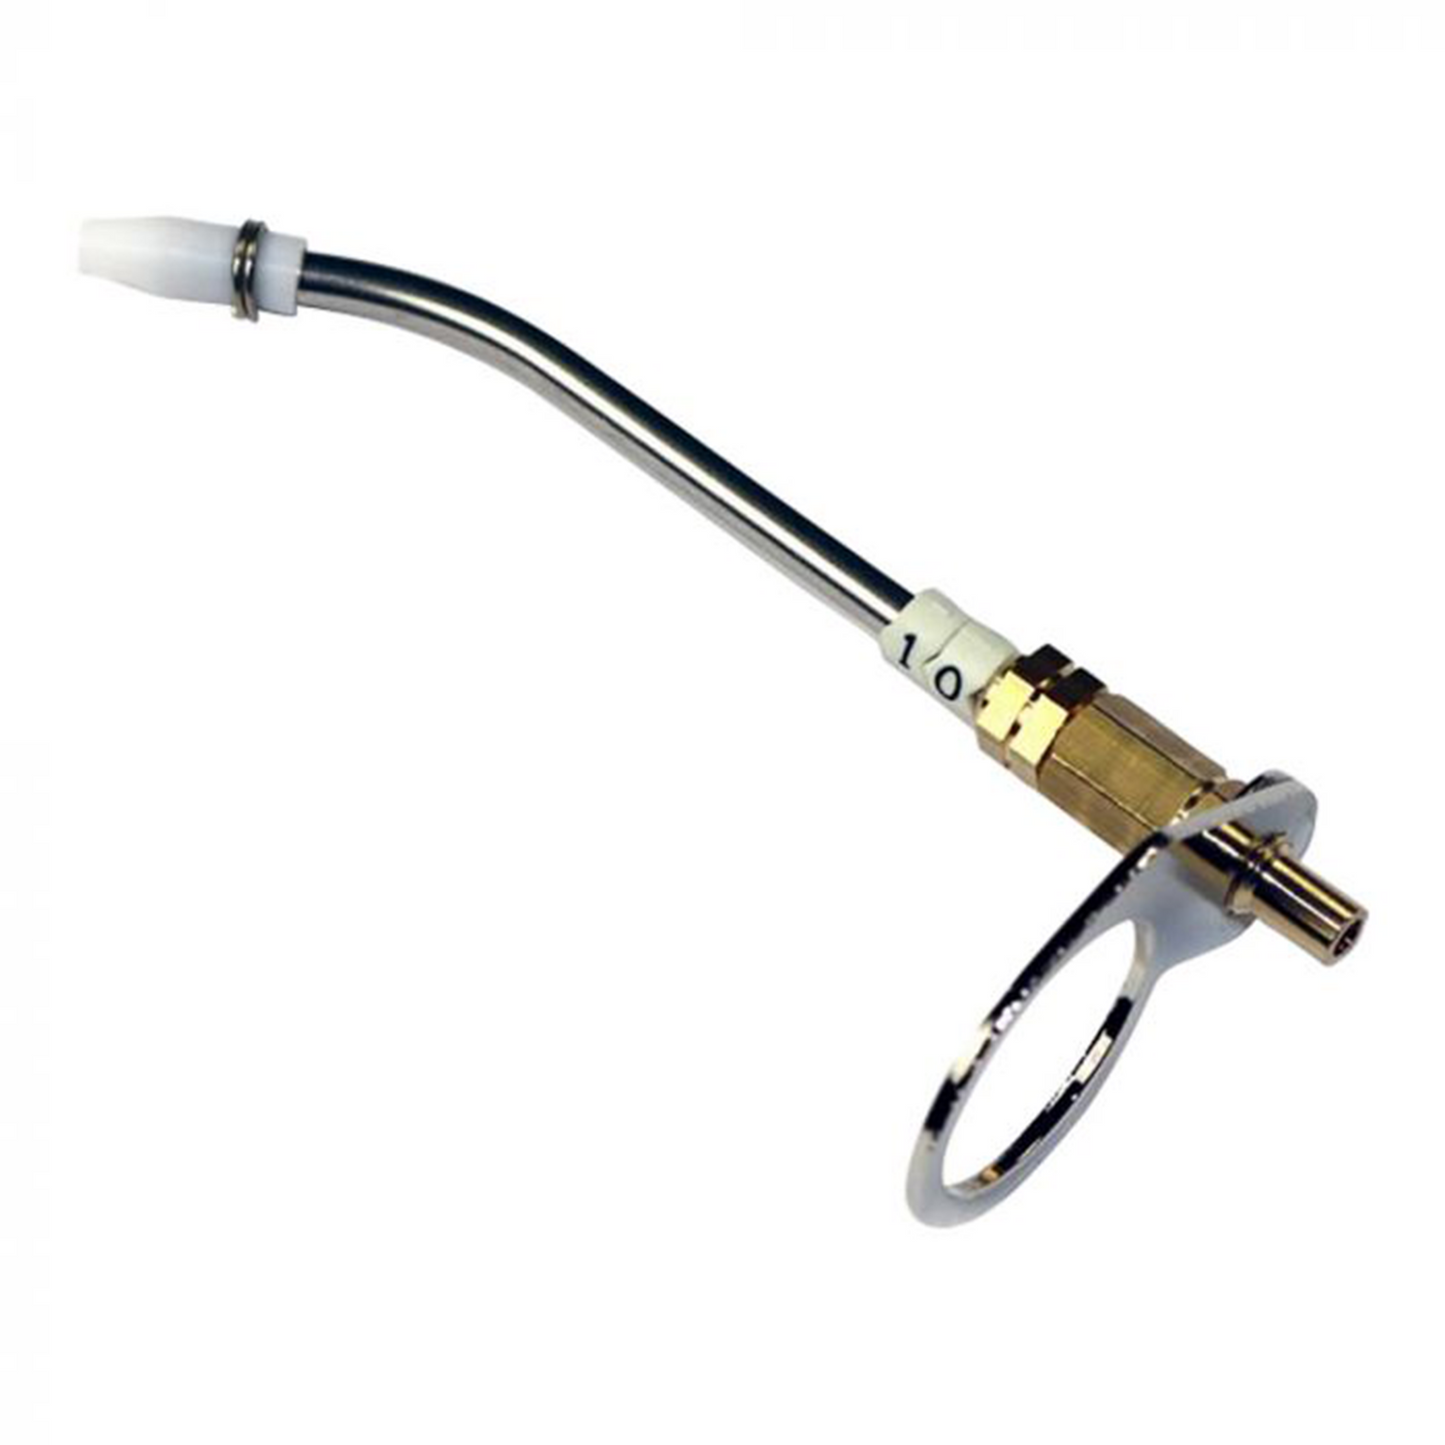 Hakko_ B2148 Guide Pipe Assembly_ Soldering Accessories_ Hakko Products